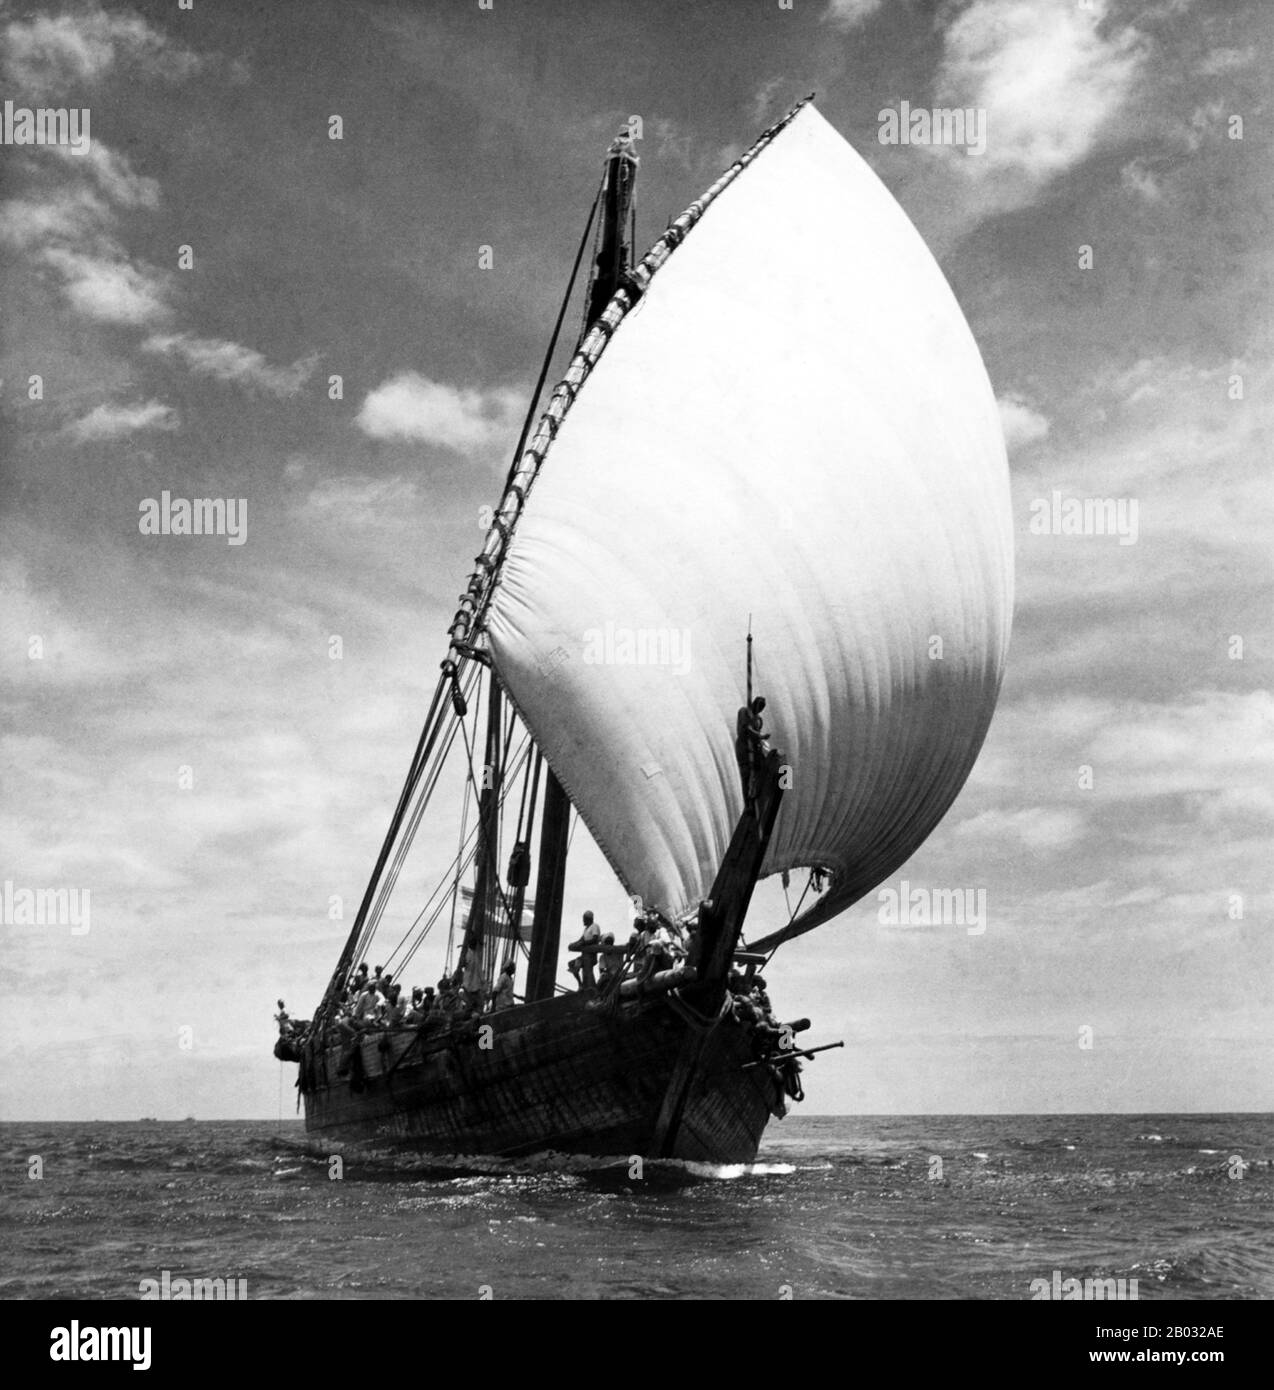 A dhow is a traditional Arab sailing vessel with one or more lateen ...